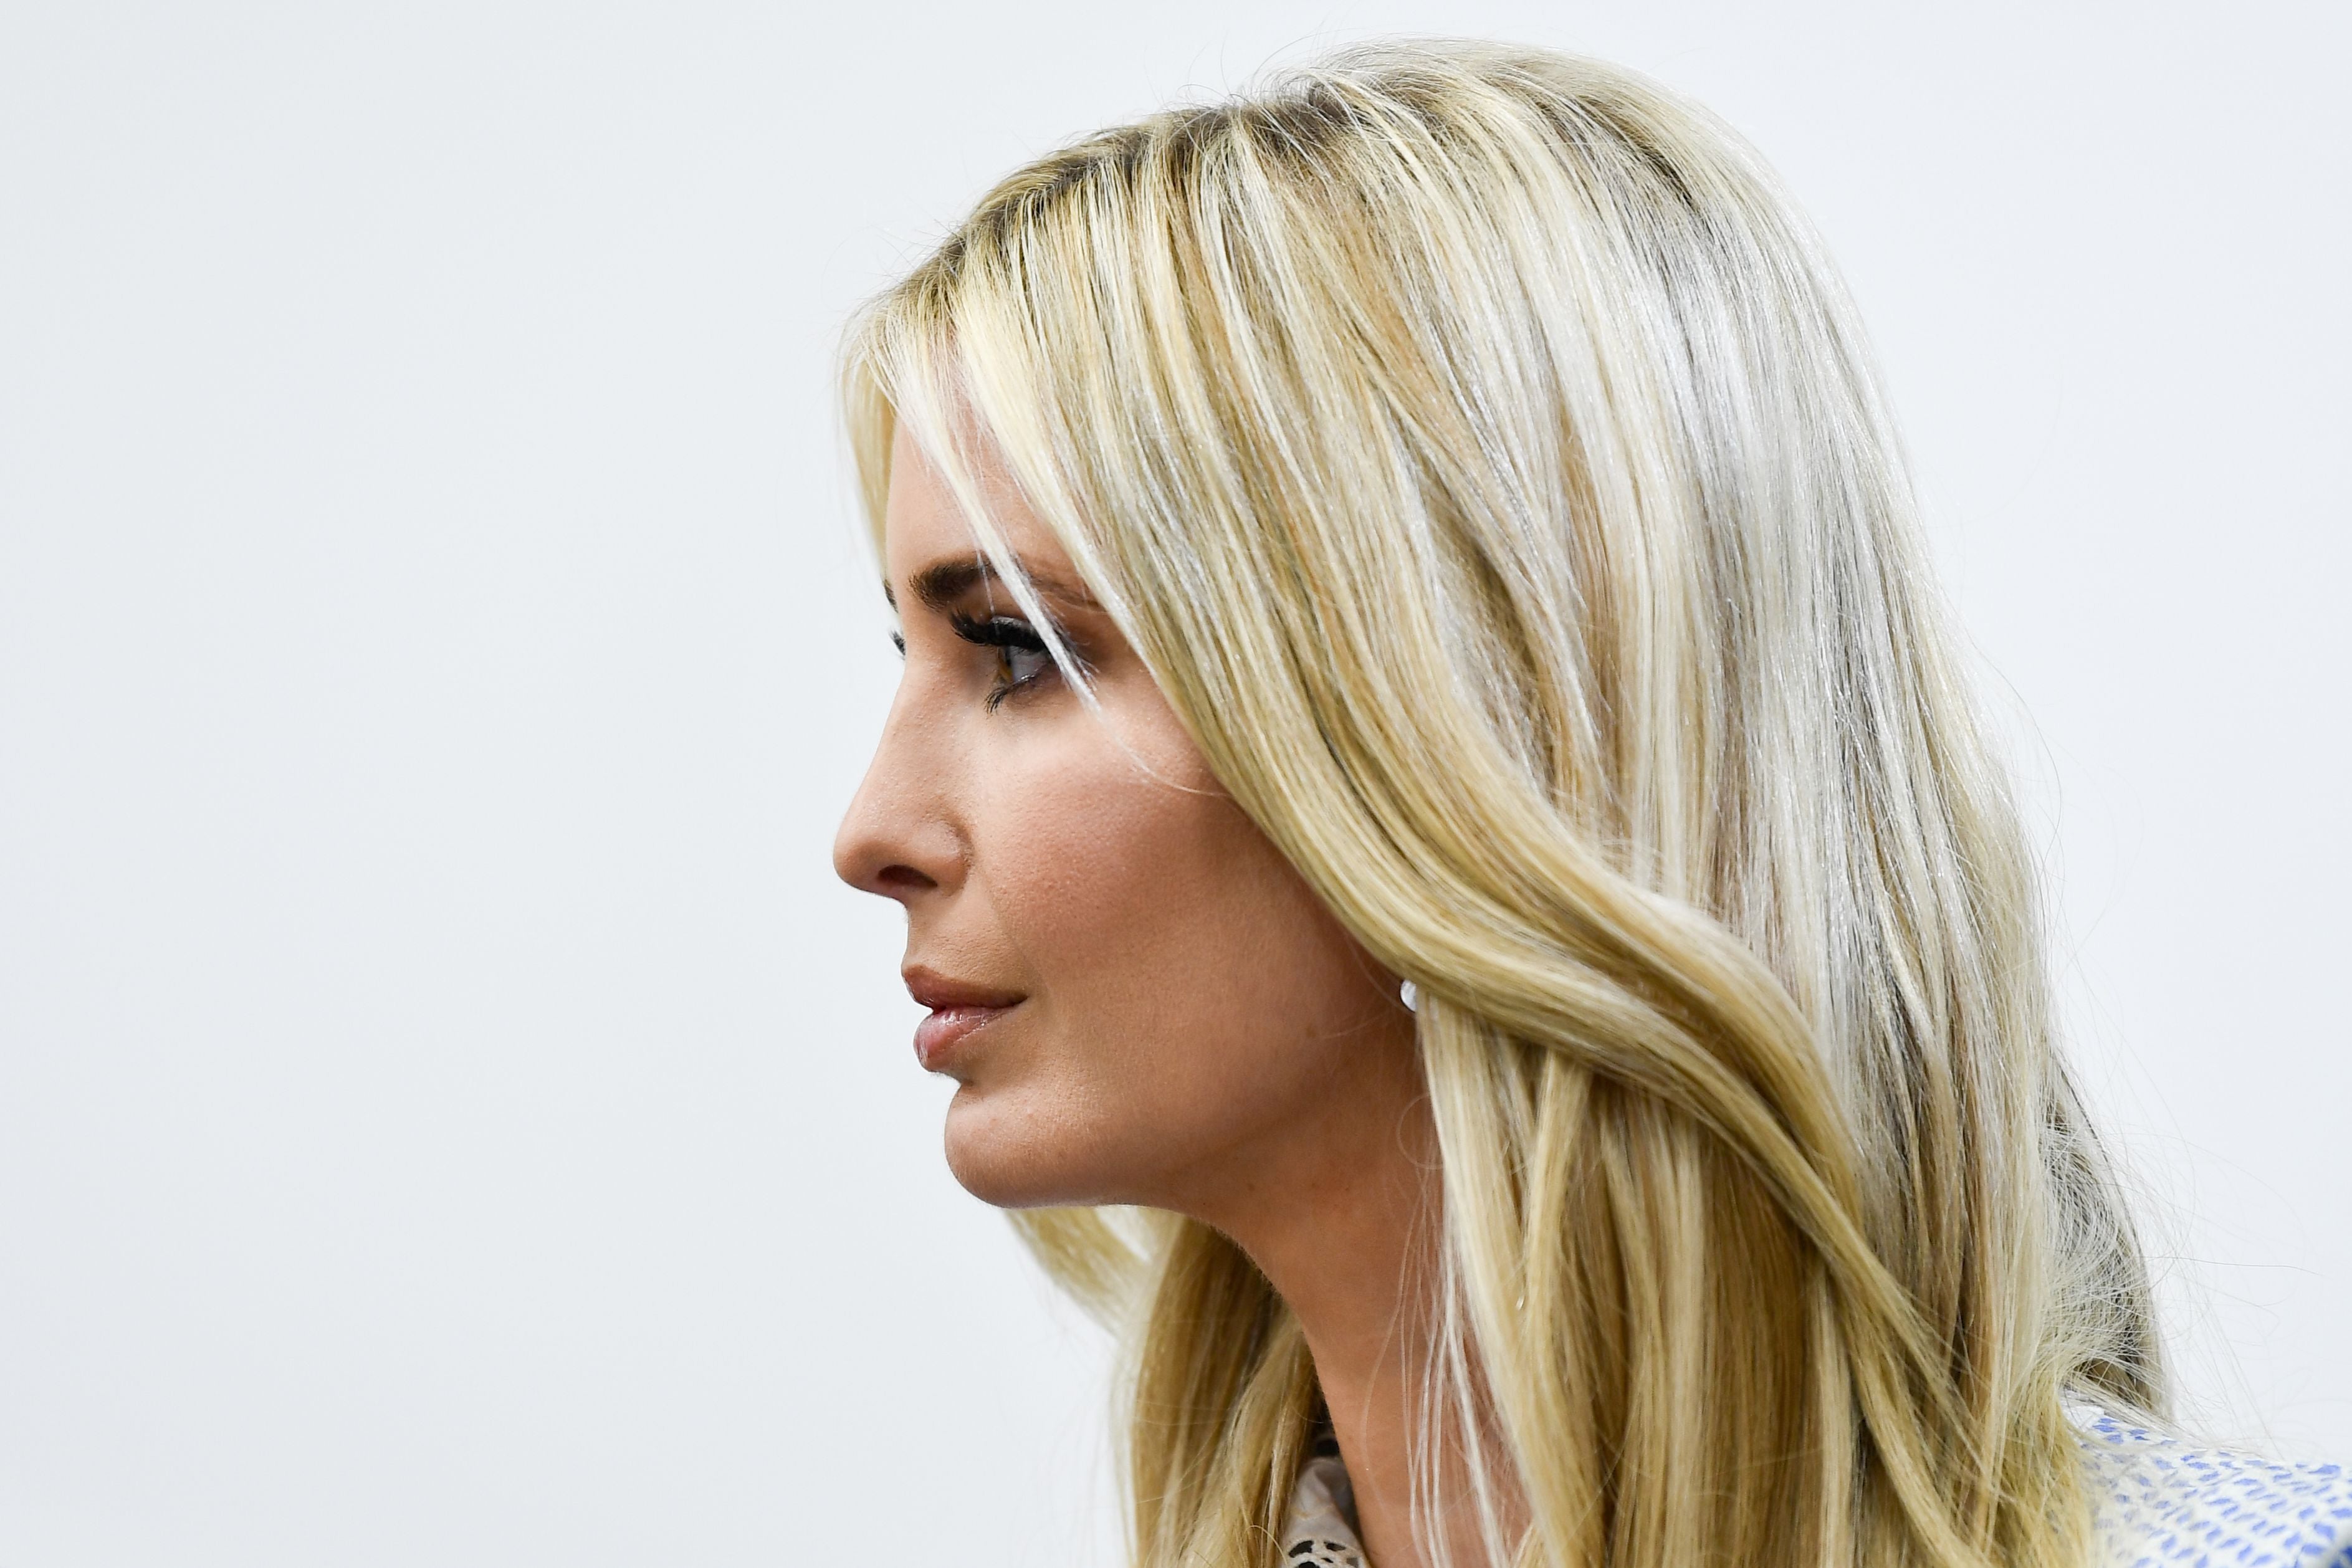 Ivanka Trump Slammed For ‘Misleading’ Tweet About Chicago’s Deadly Weekend